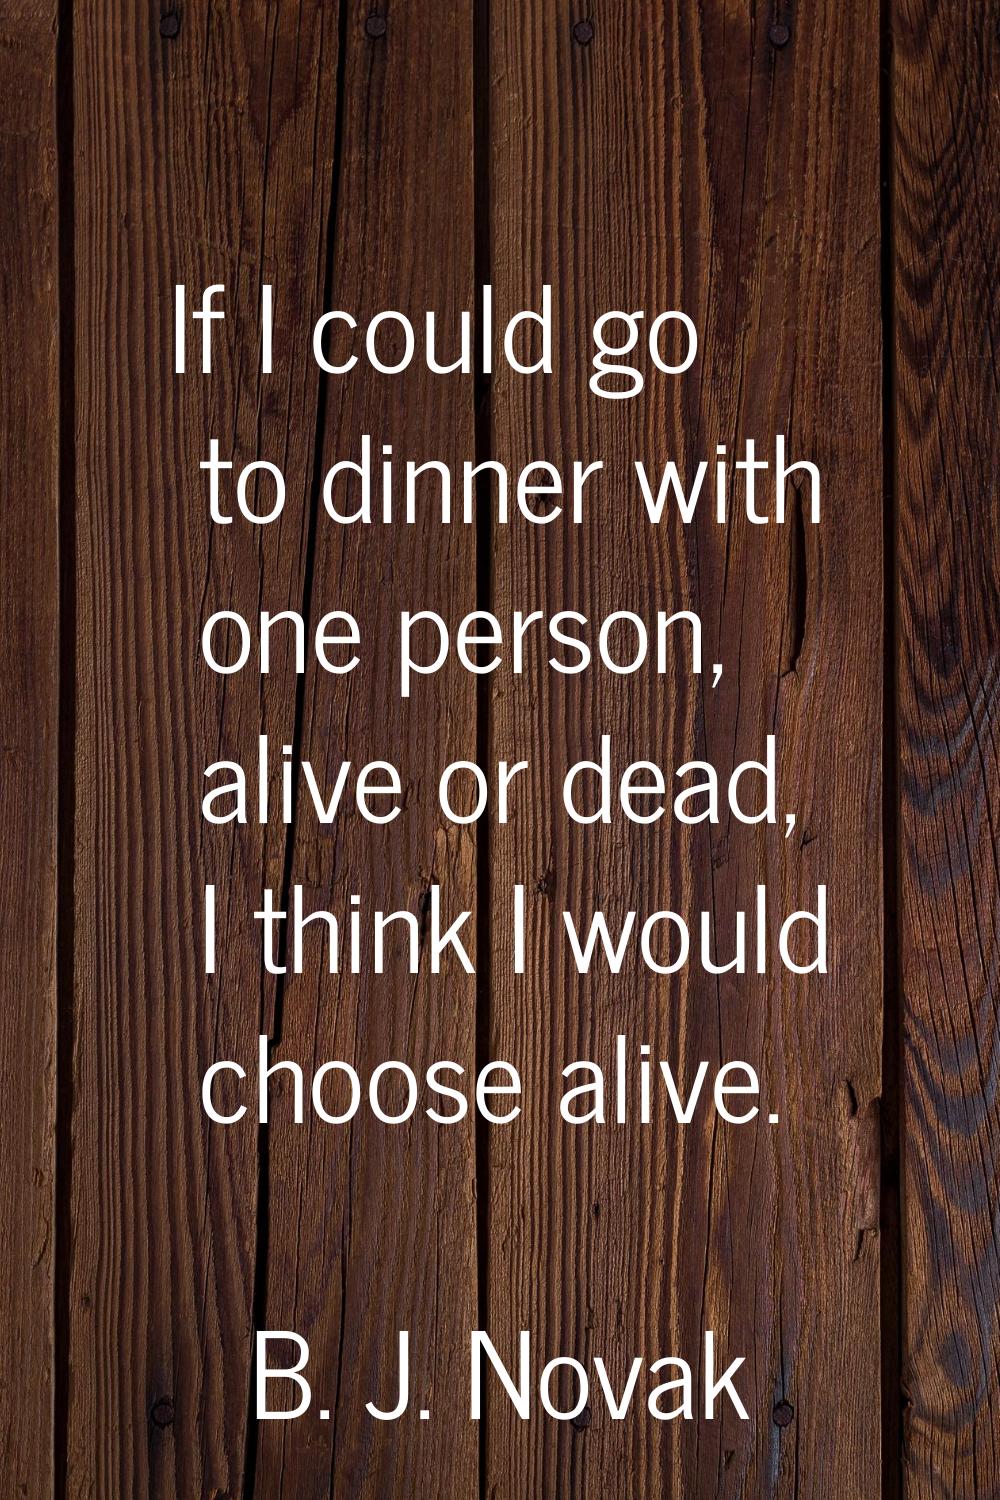 If I could go to dinner with one person, alive or dead, I think I would choose alive.